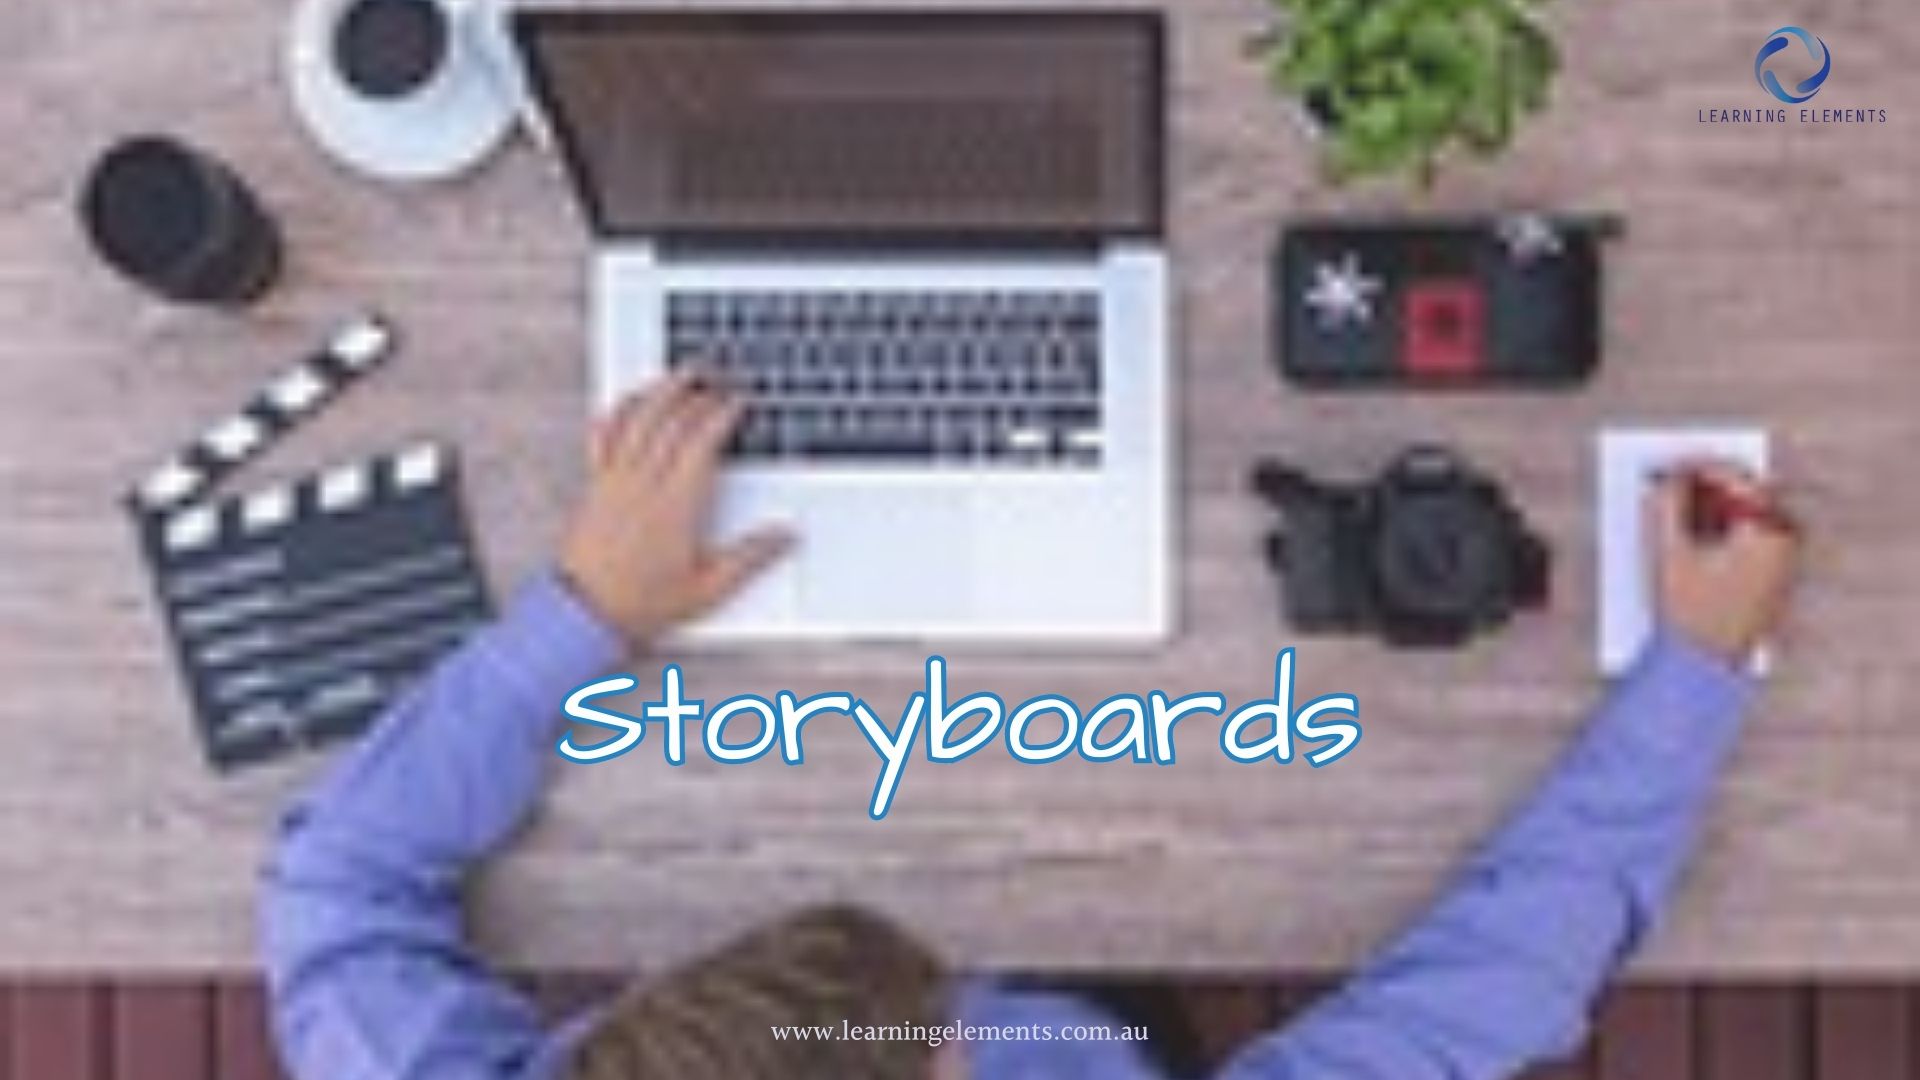 Storyboards, why use one for Training Design and Development